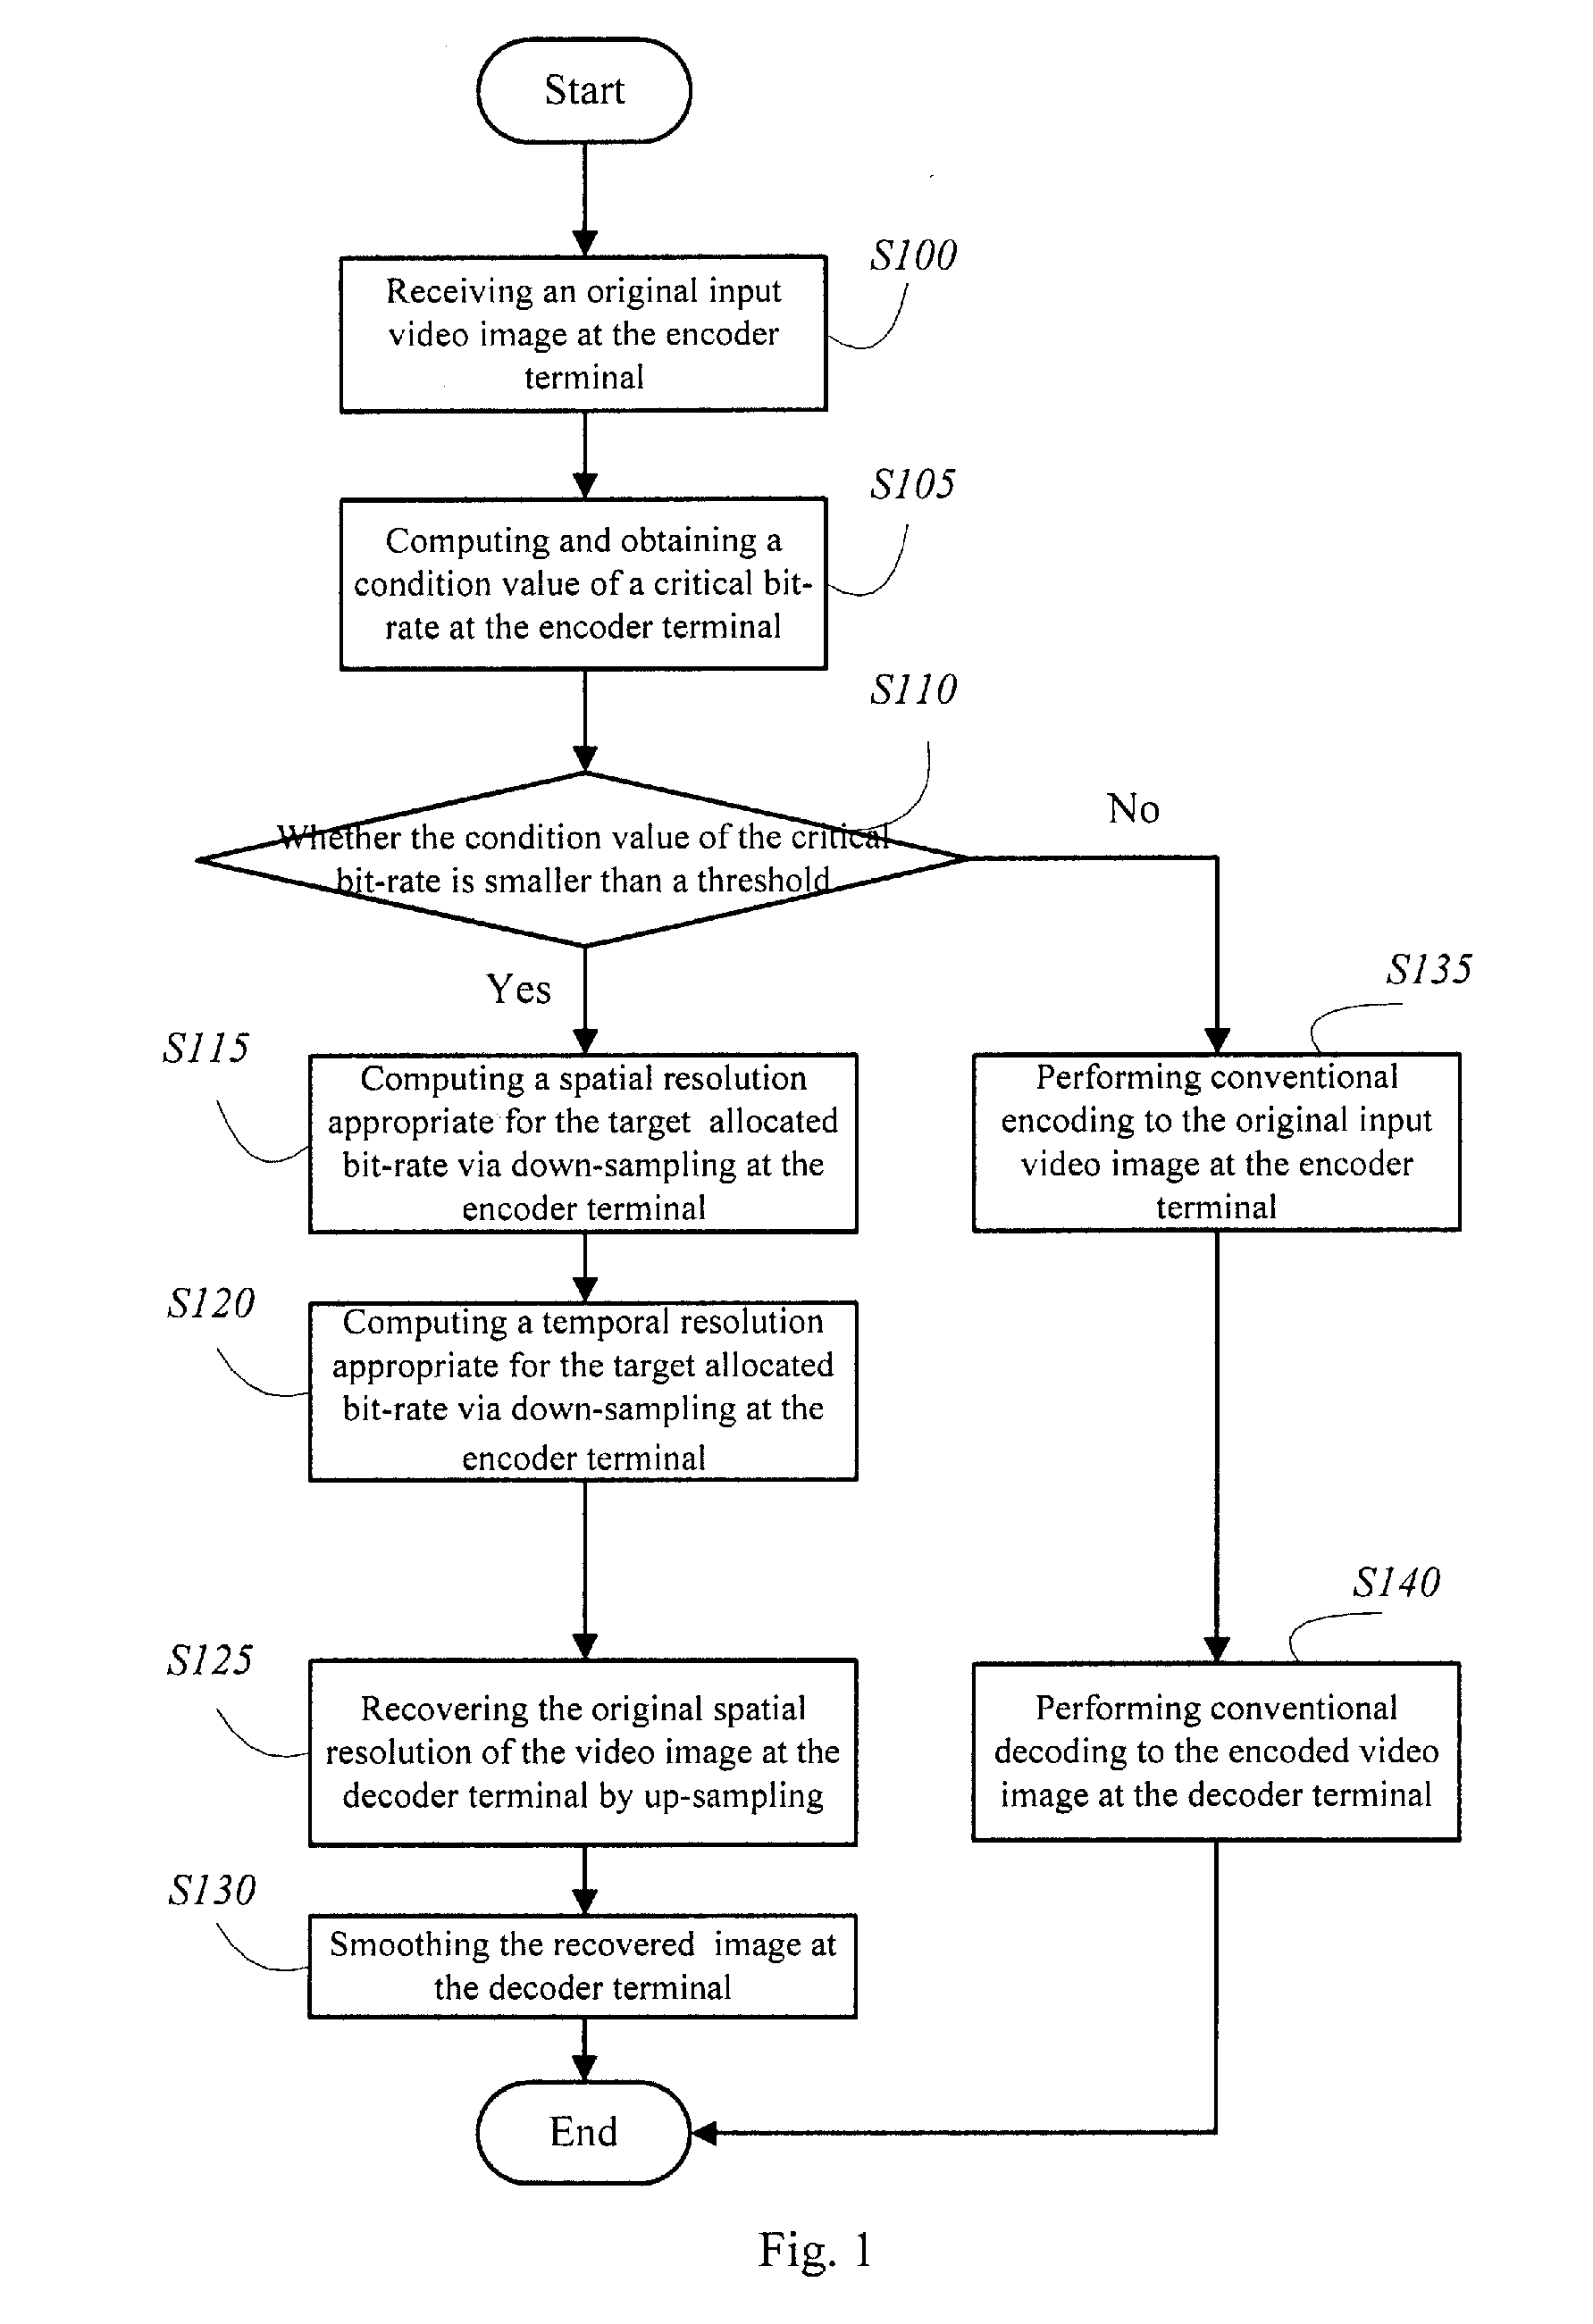 Image processing method for adaptive spatial-temporal resolution frame